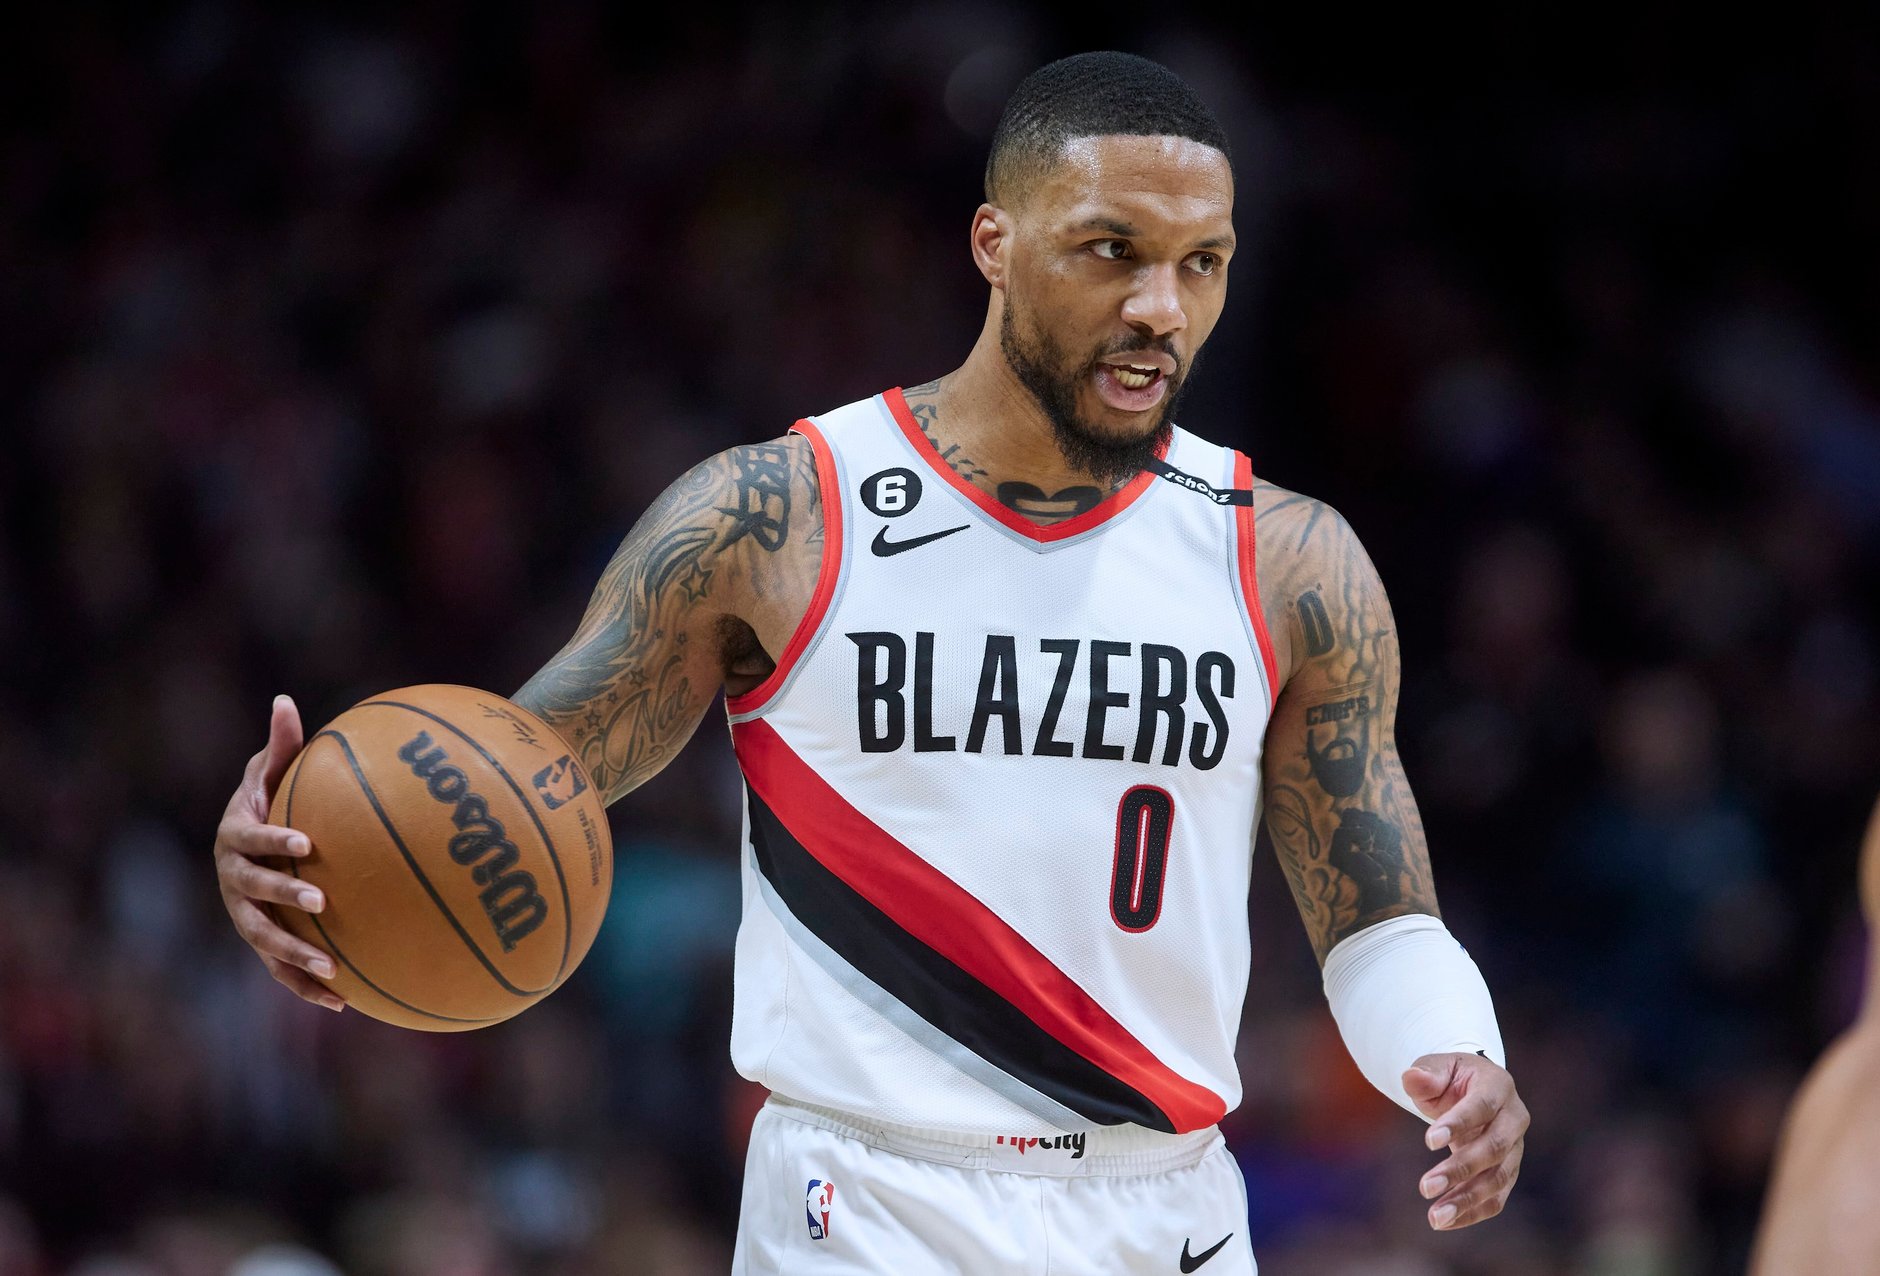 Damian Lillard is being traded from the Trail Blazers to the Bucks, ending  long saga | Courthouse News Service